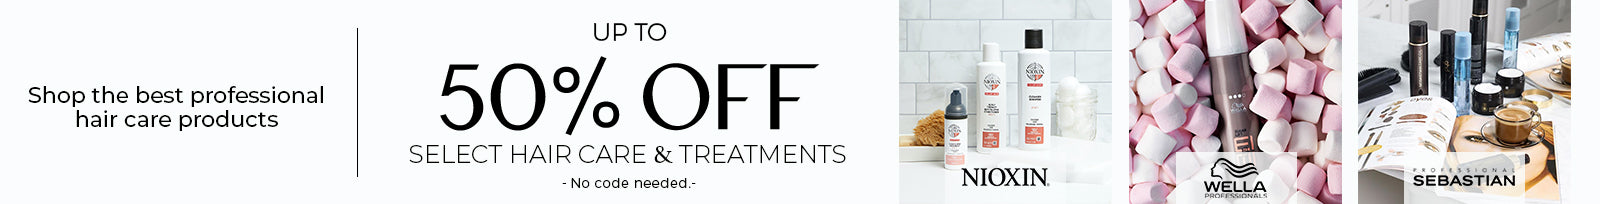 Up to 50% Off Select Hair Care & Treatments